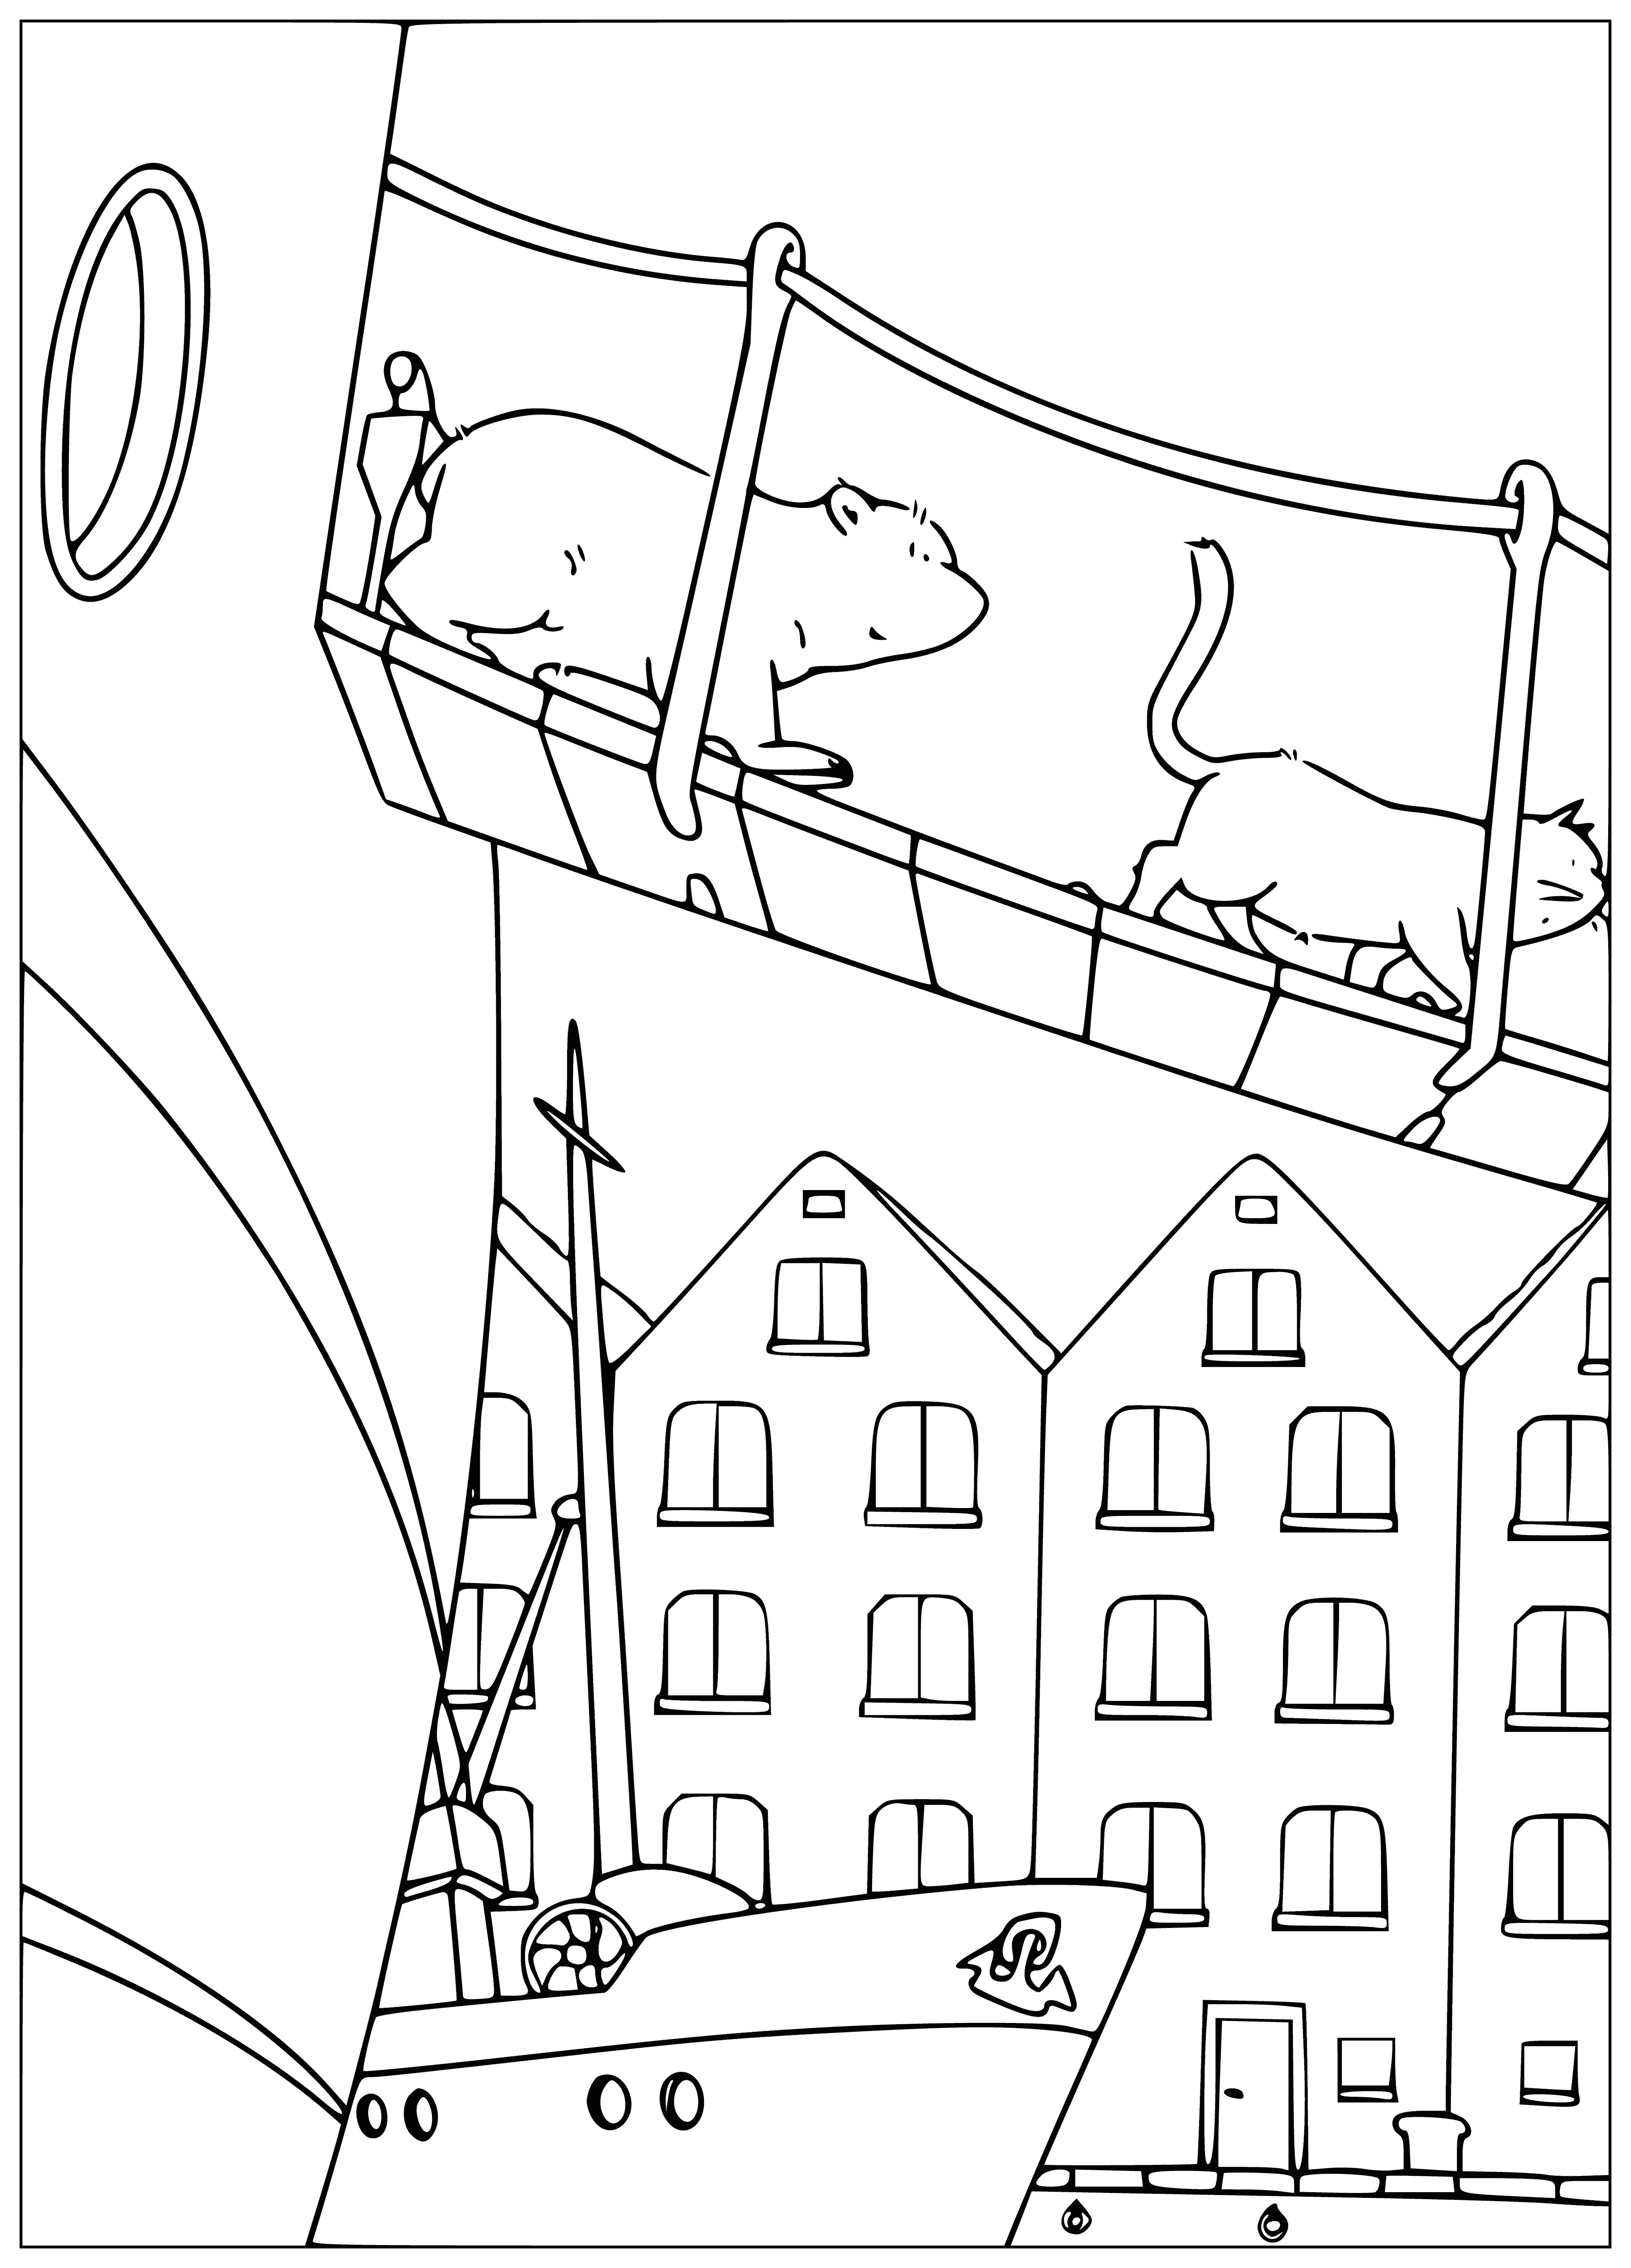 coloring page: A small polar bear stands on the dock, looking out at the water w/ a red scarf on. The sun is shining & the sky is clear.